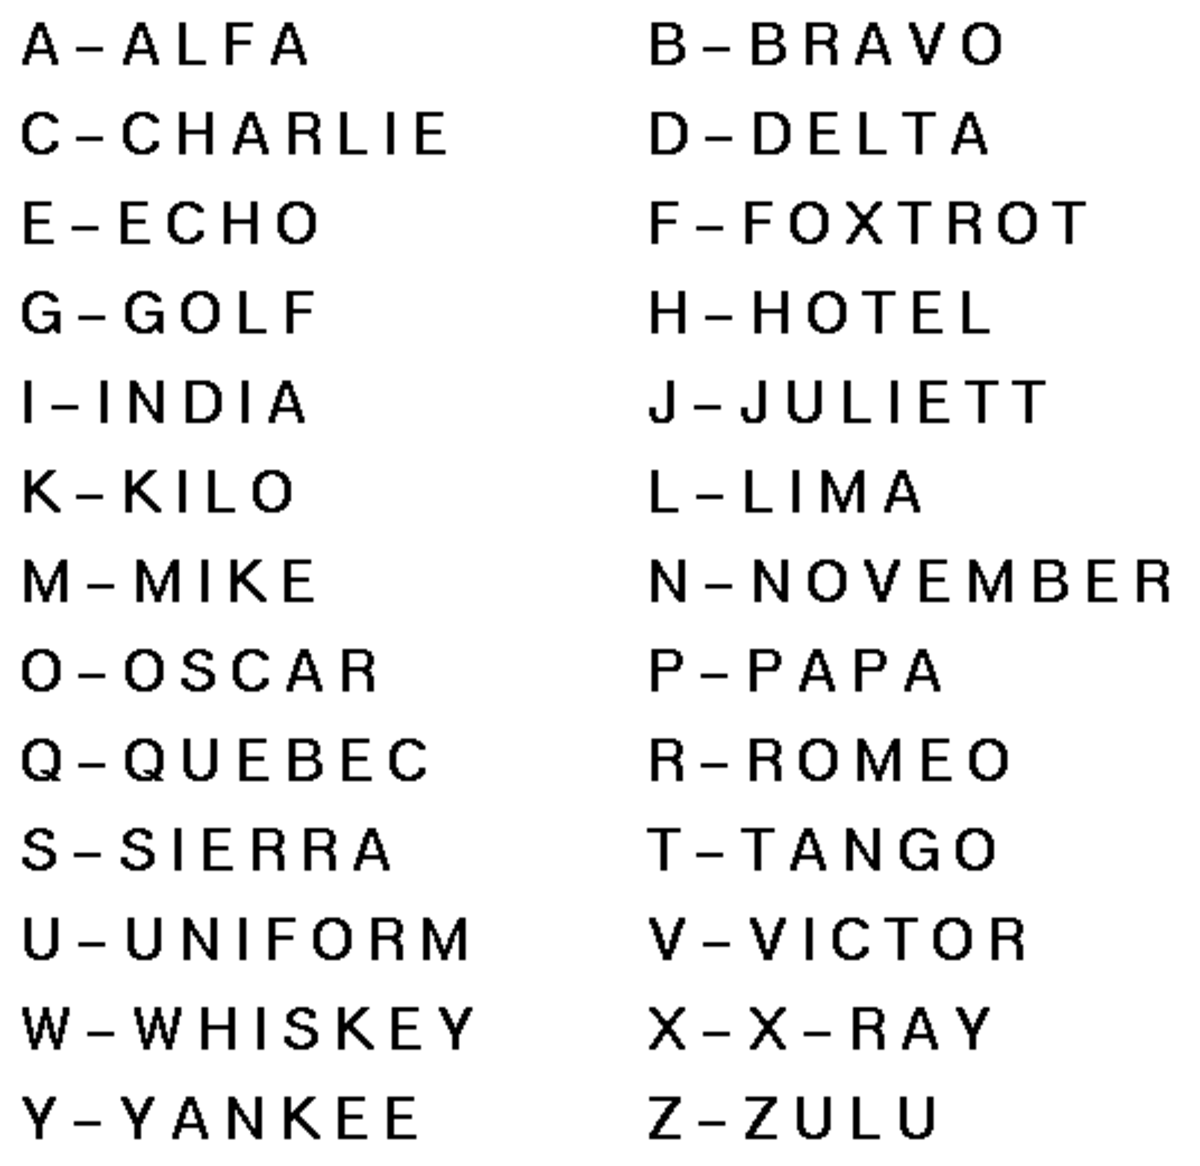 What is the Military, Police or NATO Phonetic Alphabet? | HubPages